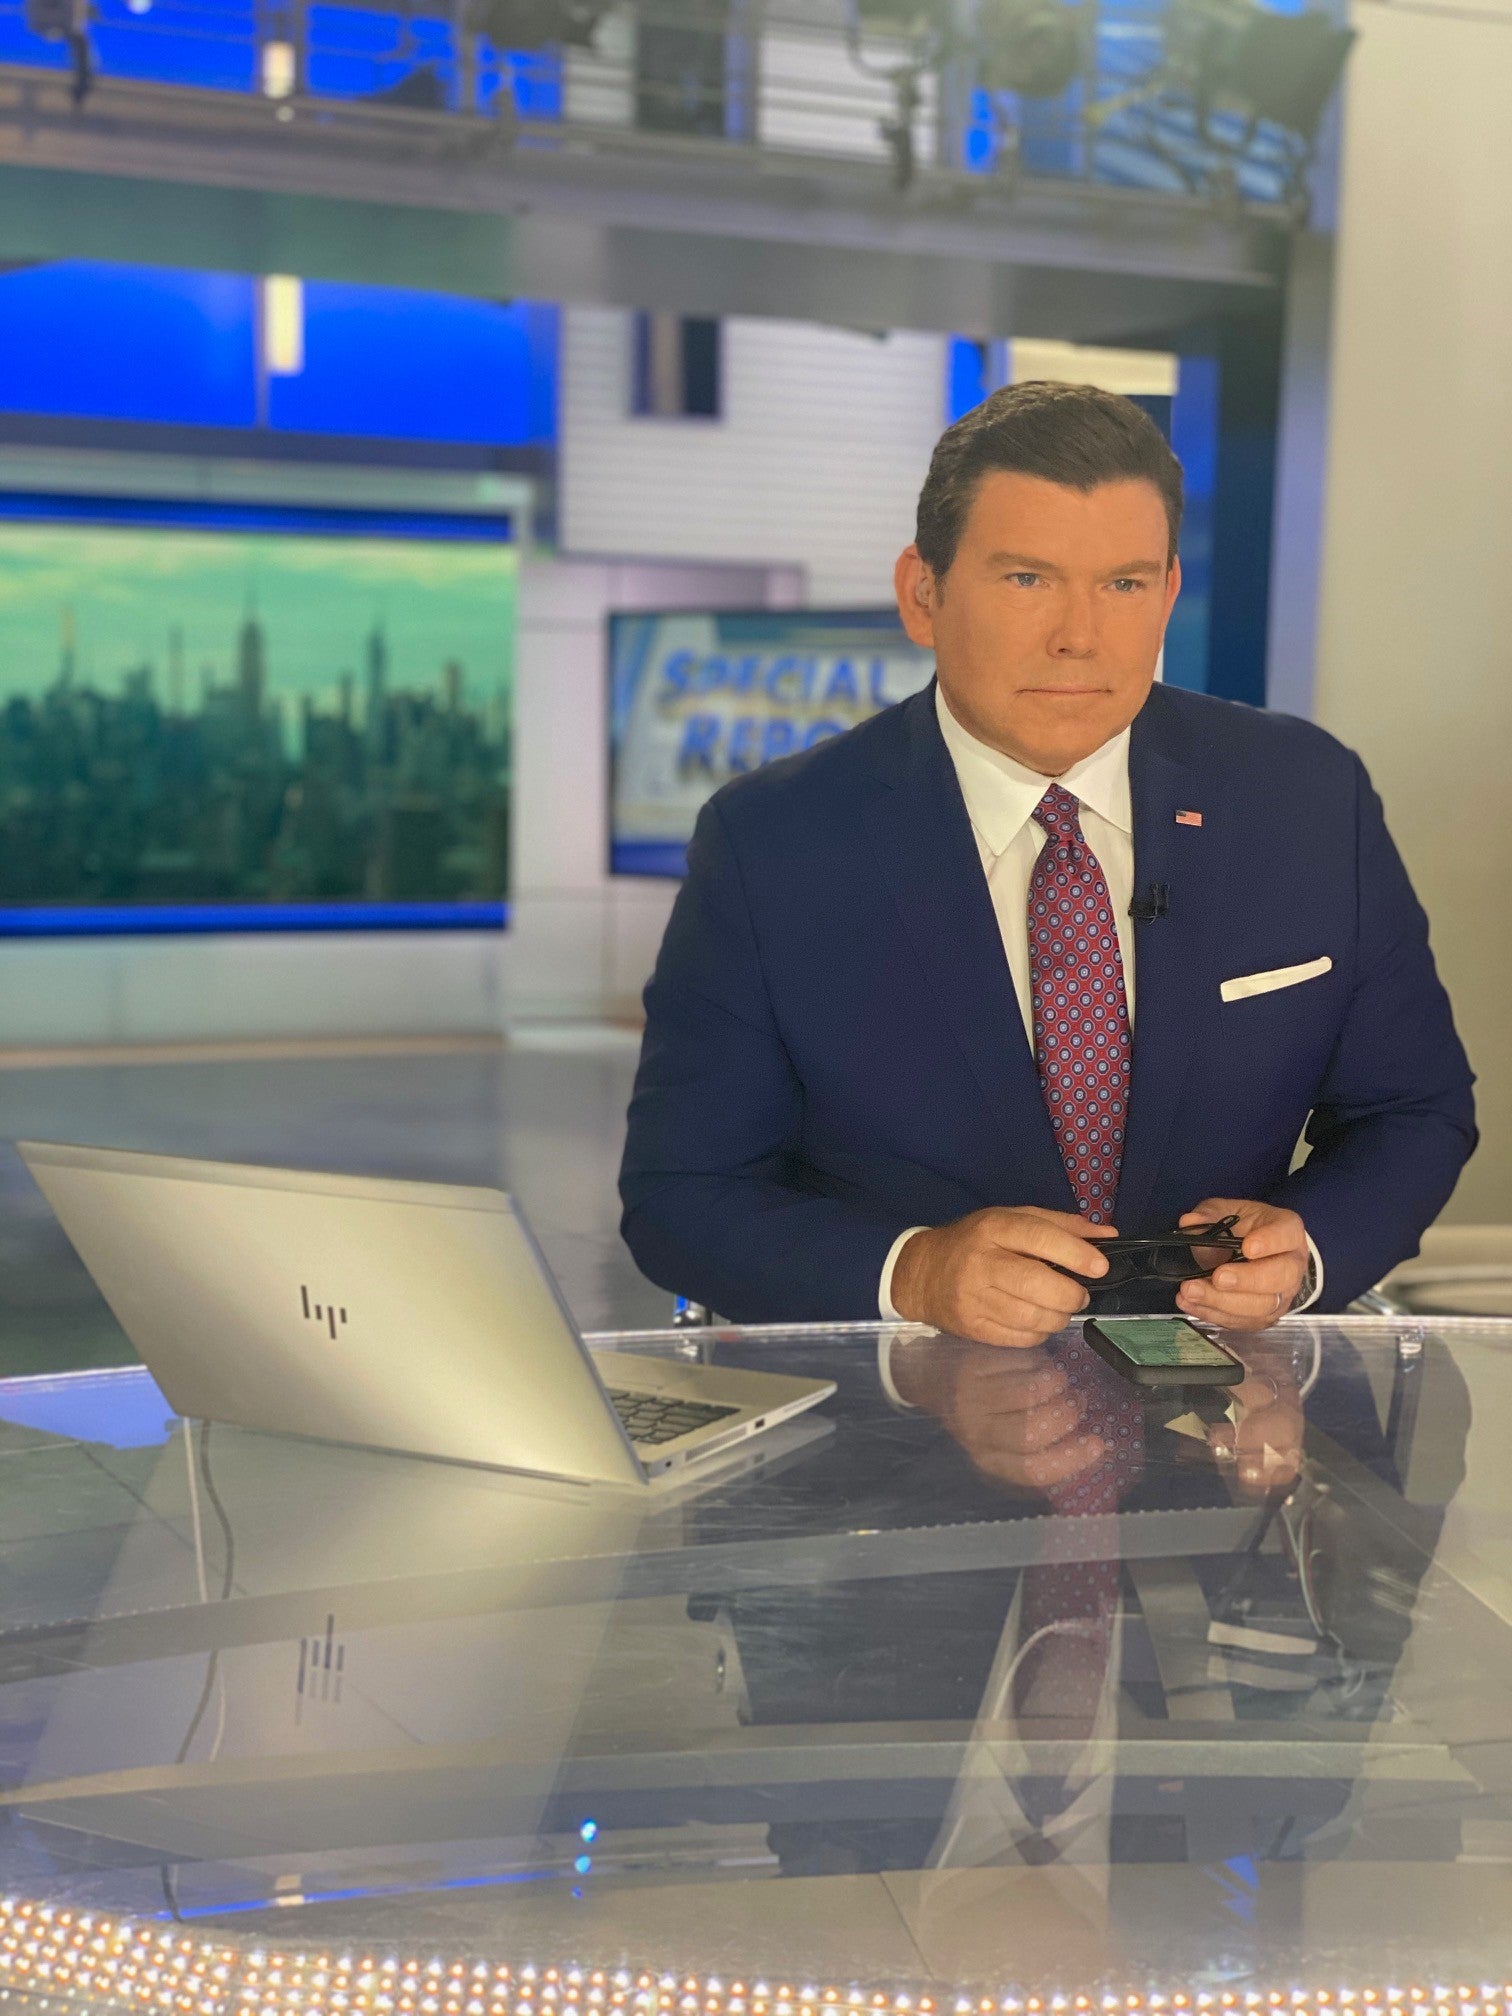 Baier covers anchors Special Report from Fox News Channel HQ in New York